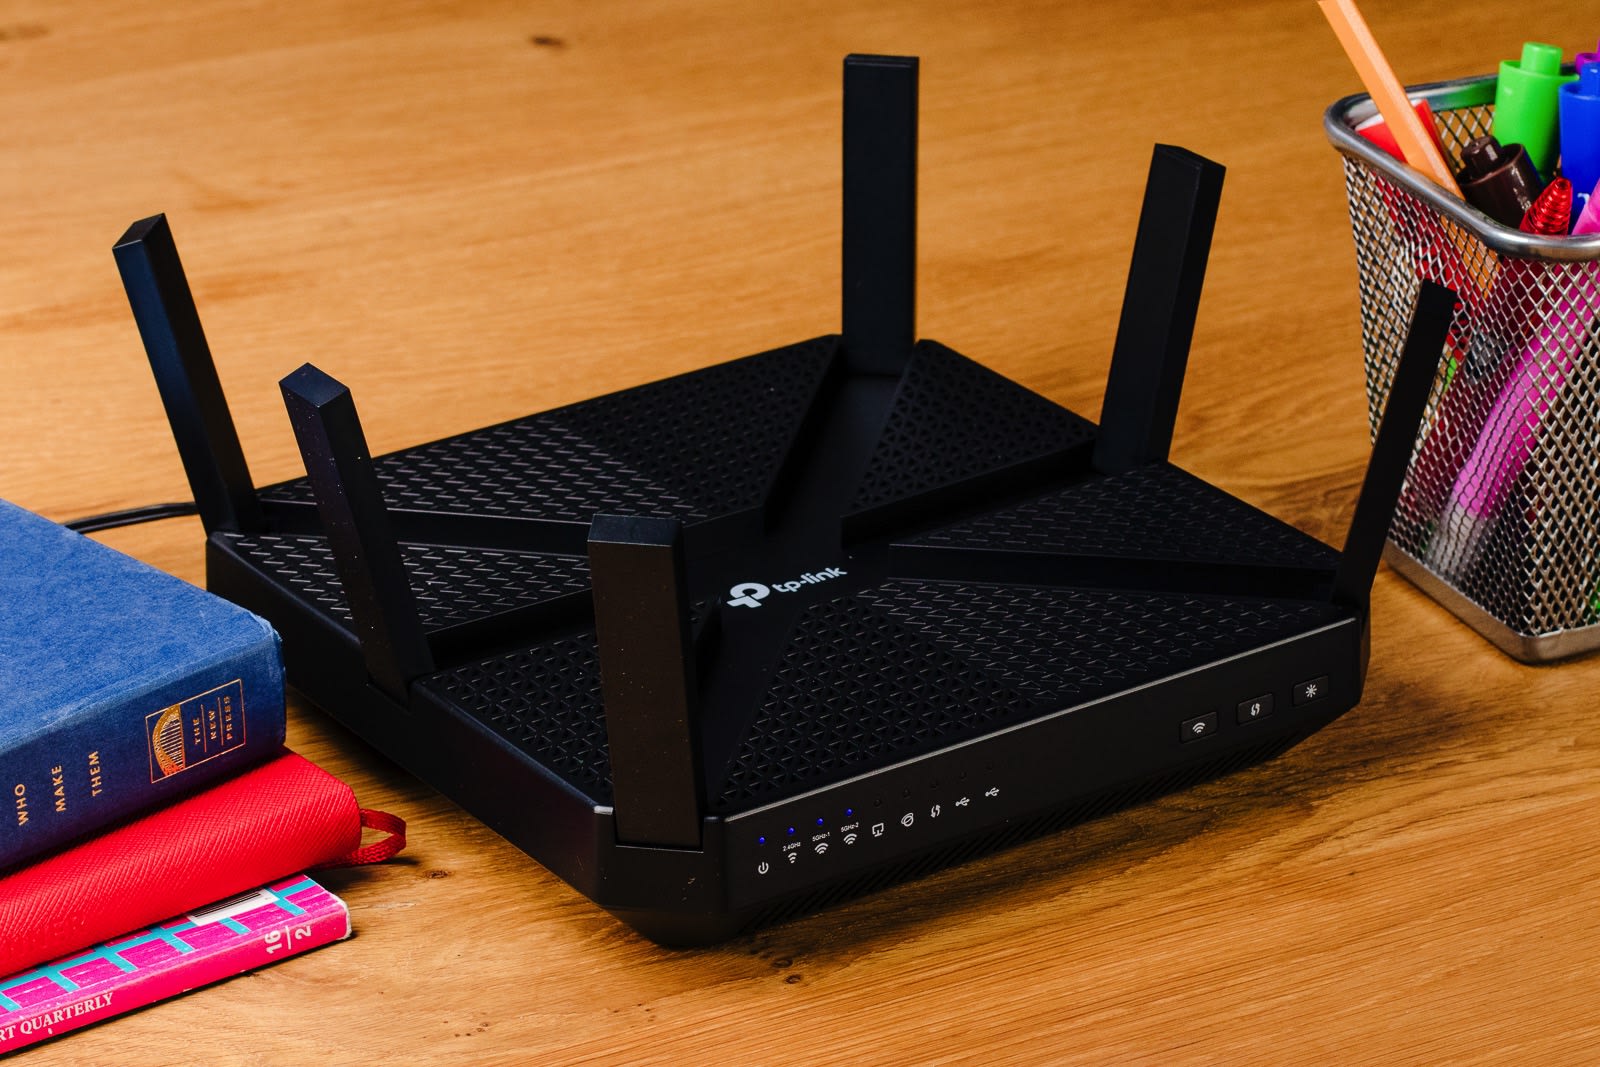 Inaccessible Kangaroo react The best WiFi router | Engadget